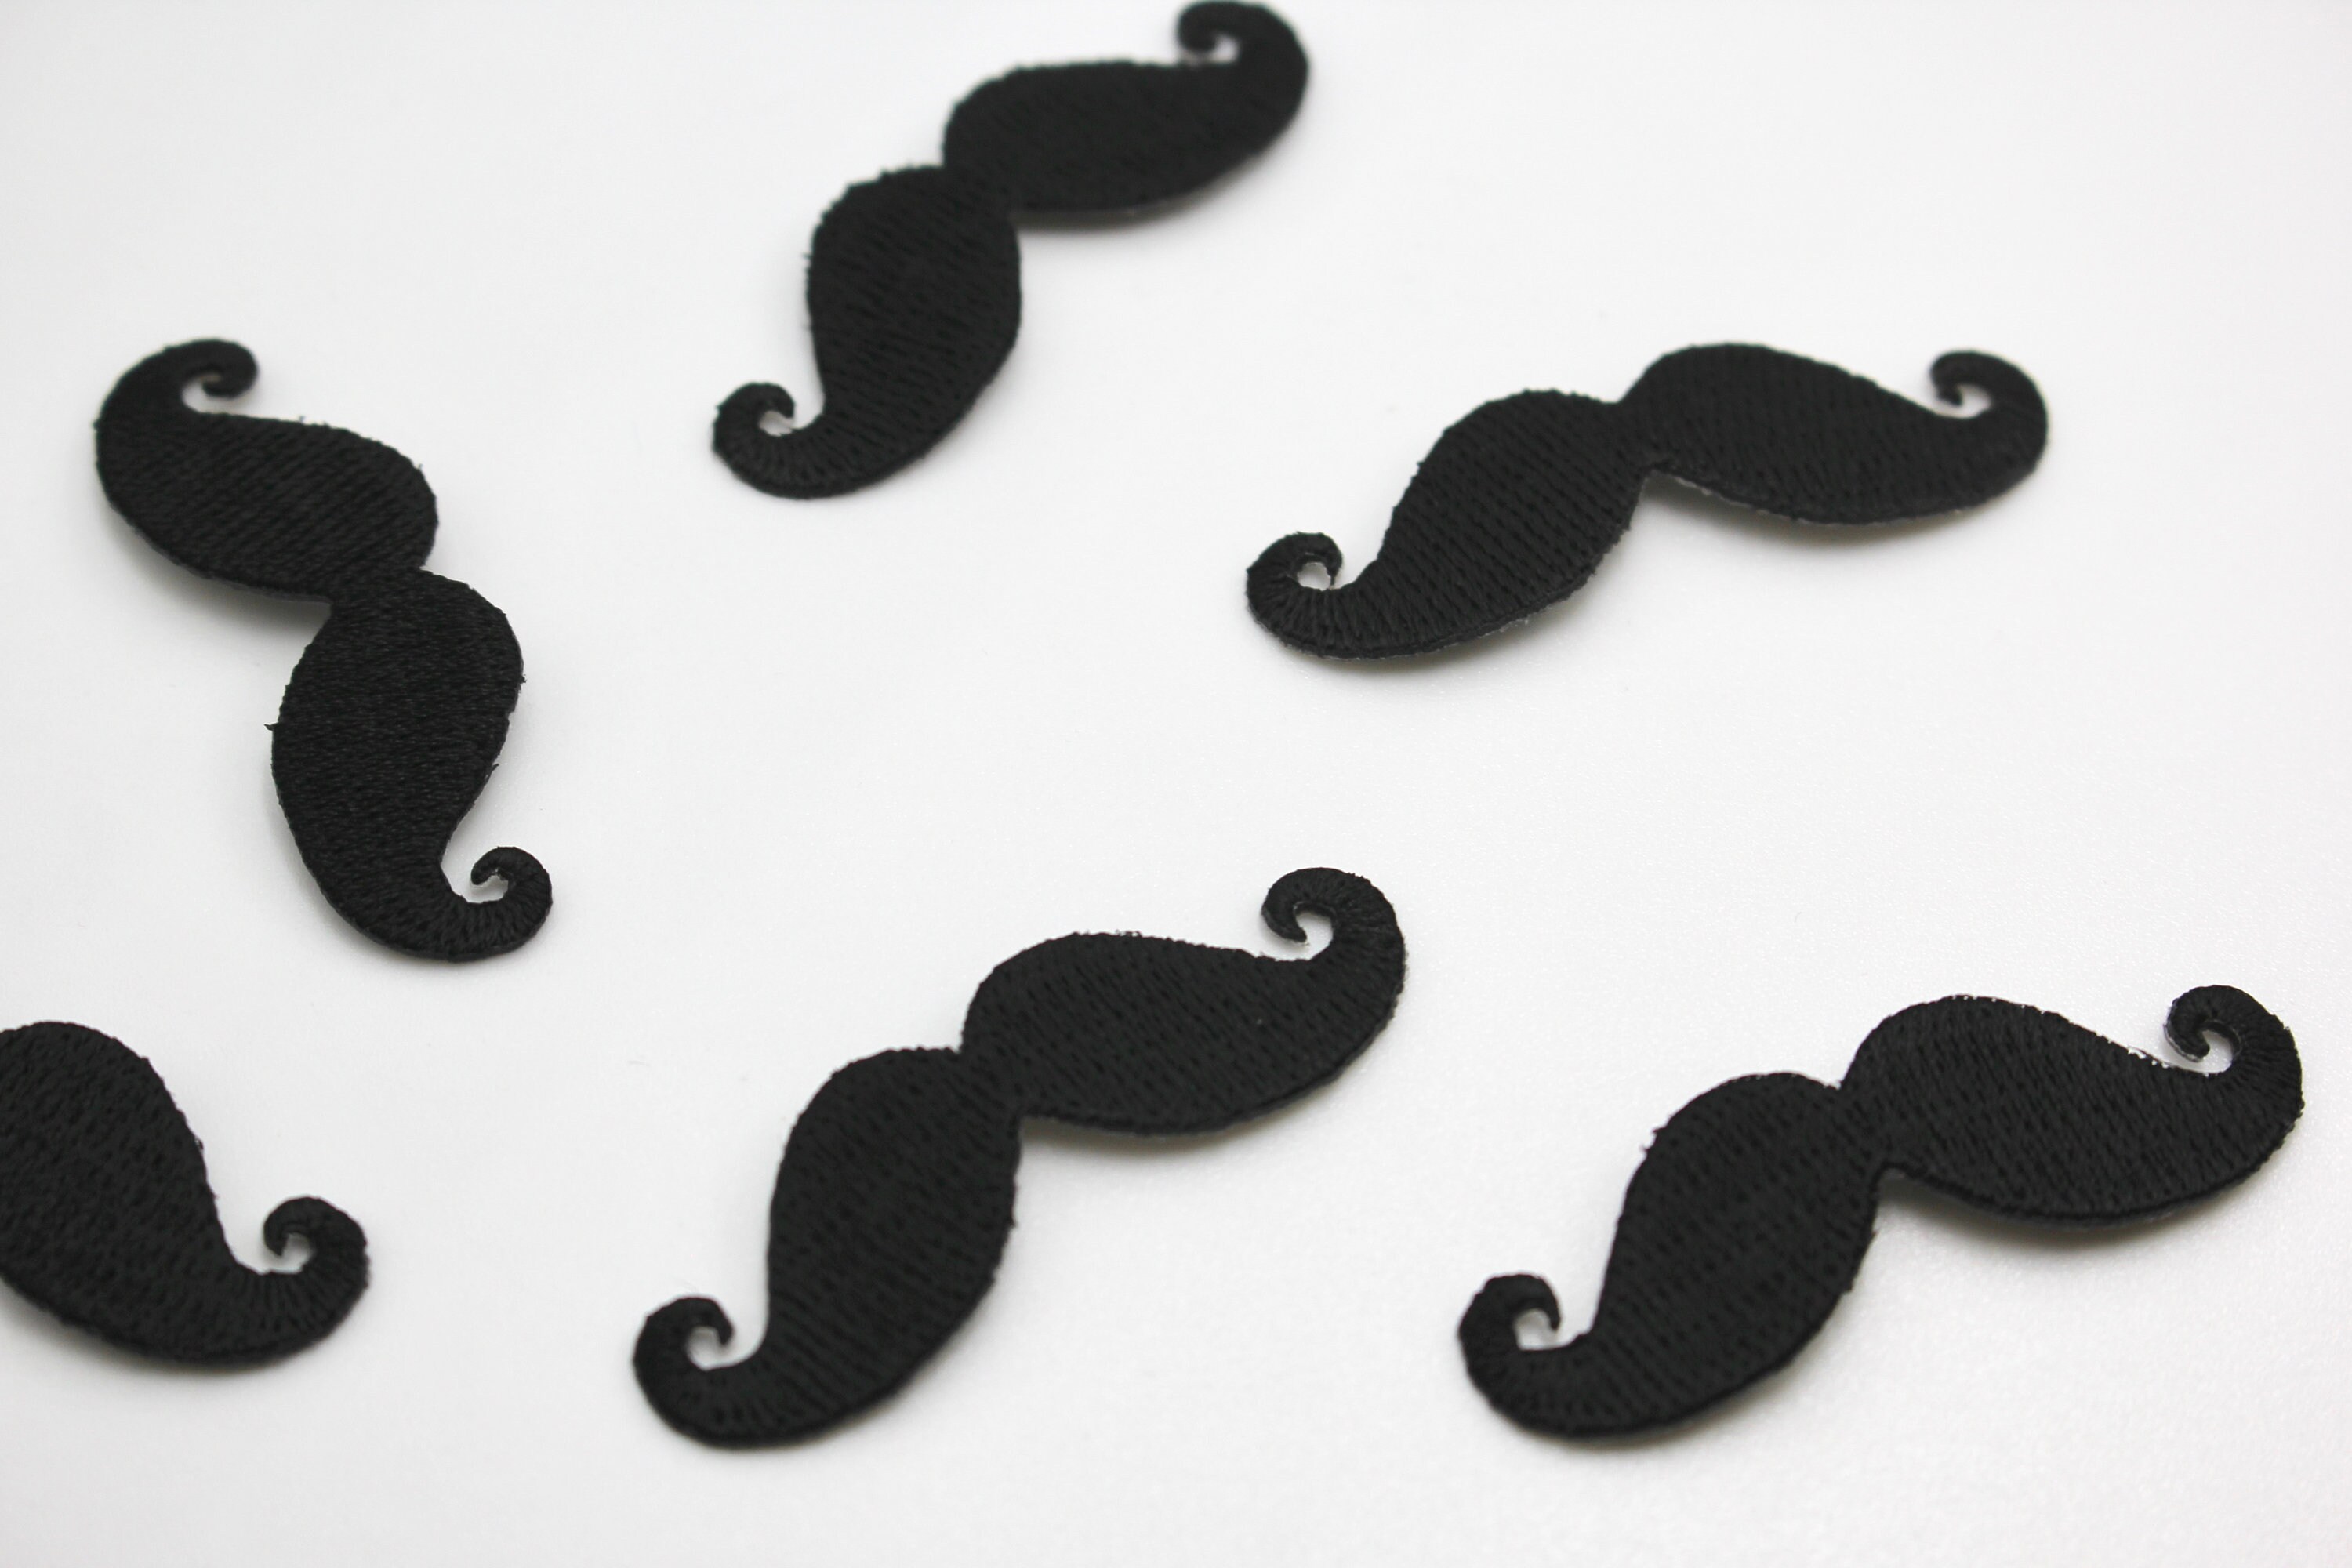 Moustache Iron On Badge Sew On Patch Black Embroidered Monopoly Mustache Motif 